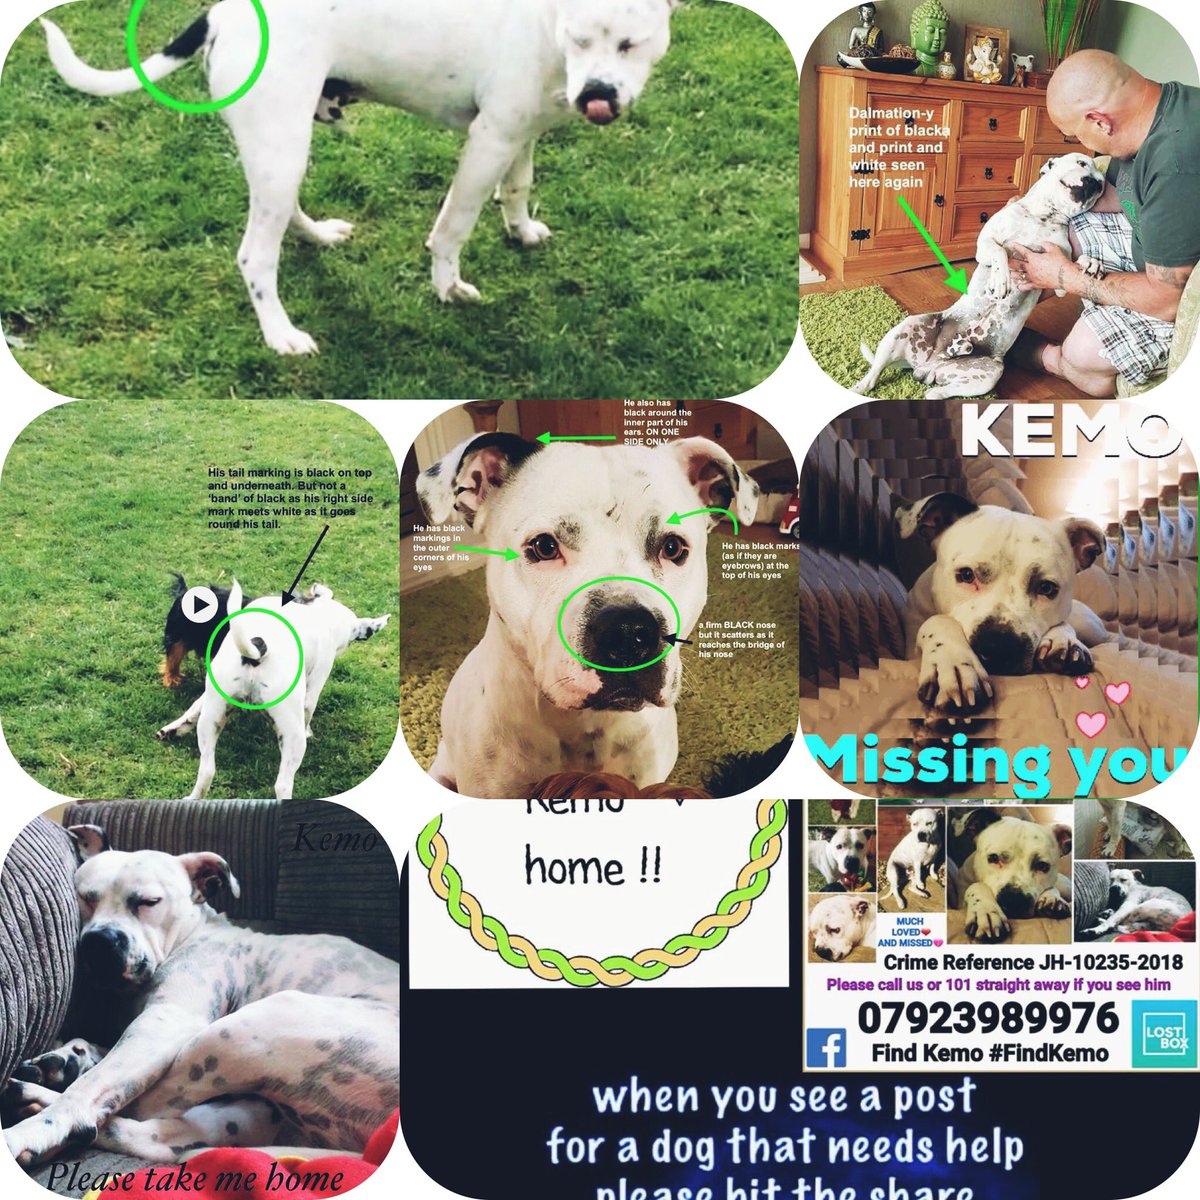 Please don't forget to look out for this lovely #TherapyDog, missing for too long now, but SOMEBODY is his neighbour! Don't forget to check for the #BlackRing at the base of the tail of #White #Staffies you encounter! Please @Find_Kemo / info also @KarenFi51820768